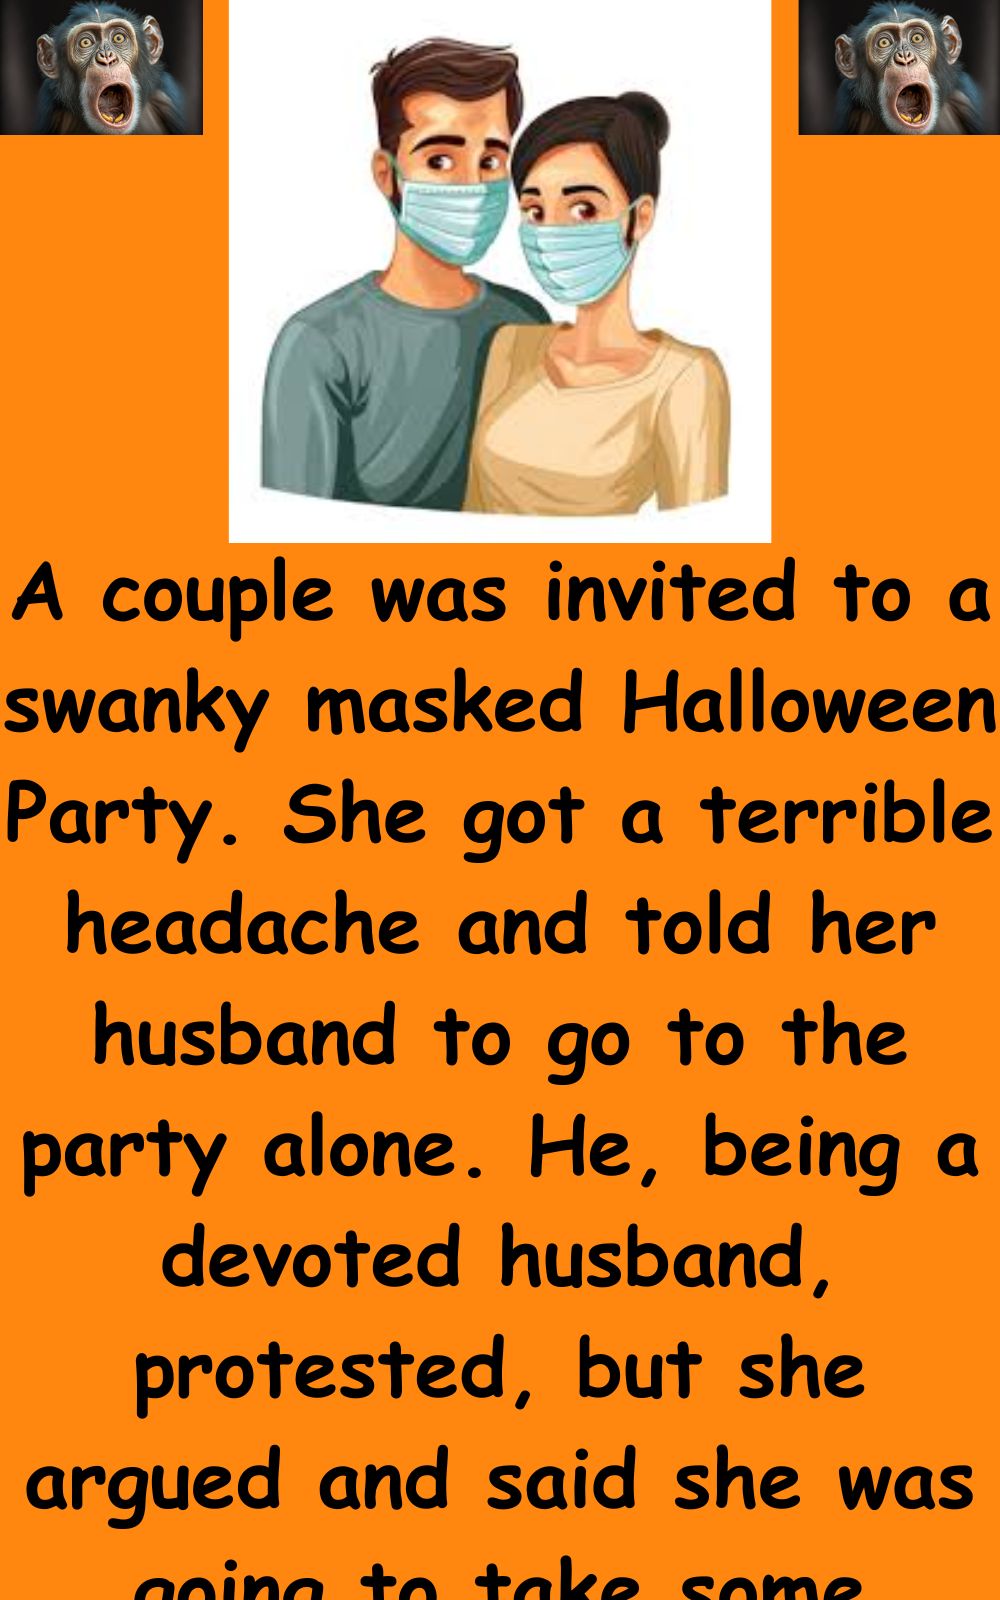 A couple was invited to a swanky masked